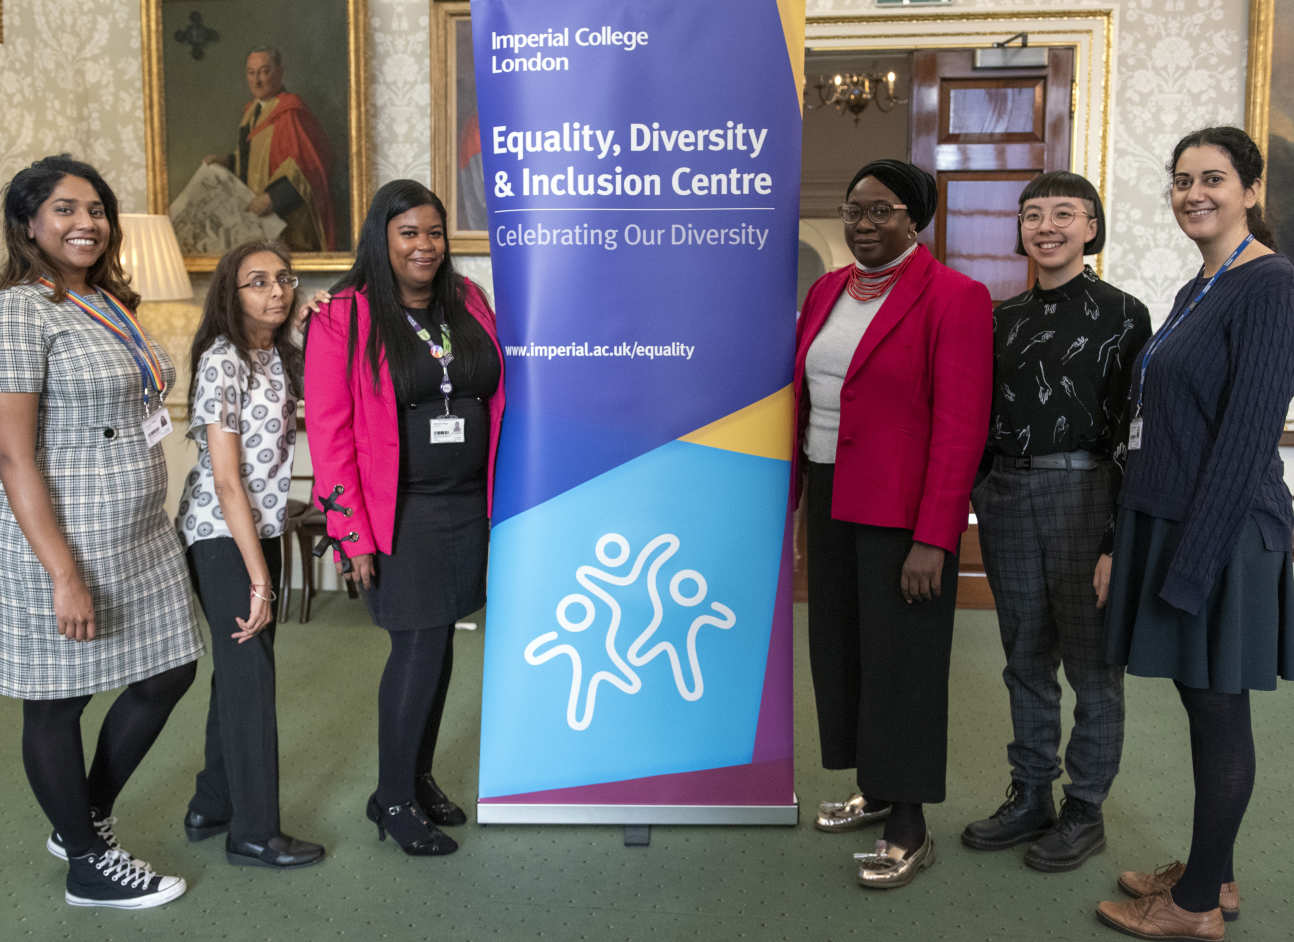 Participants at IMPACT reunion with Equality, Diversity and Inclusion Centre banner